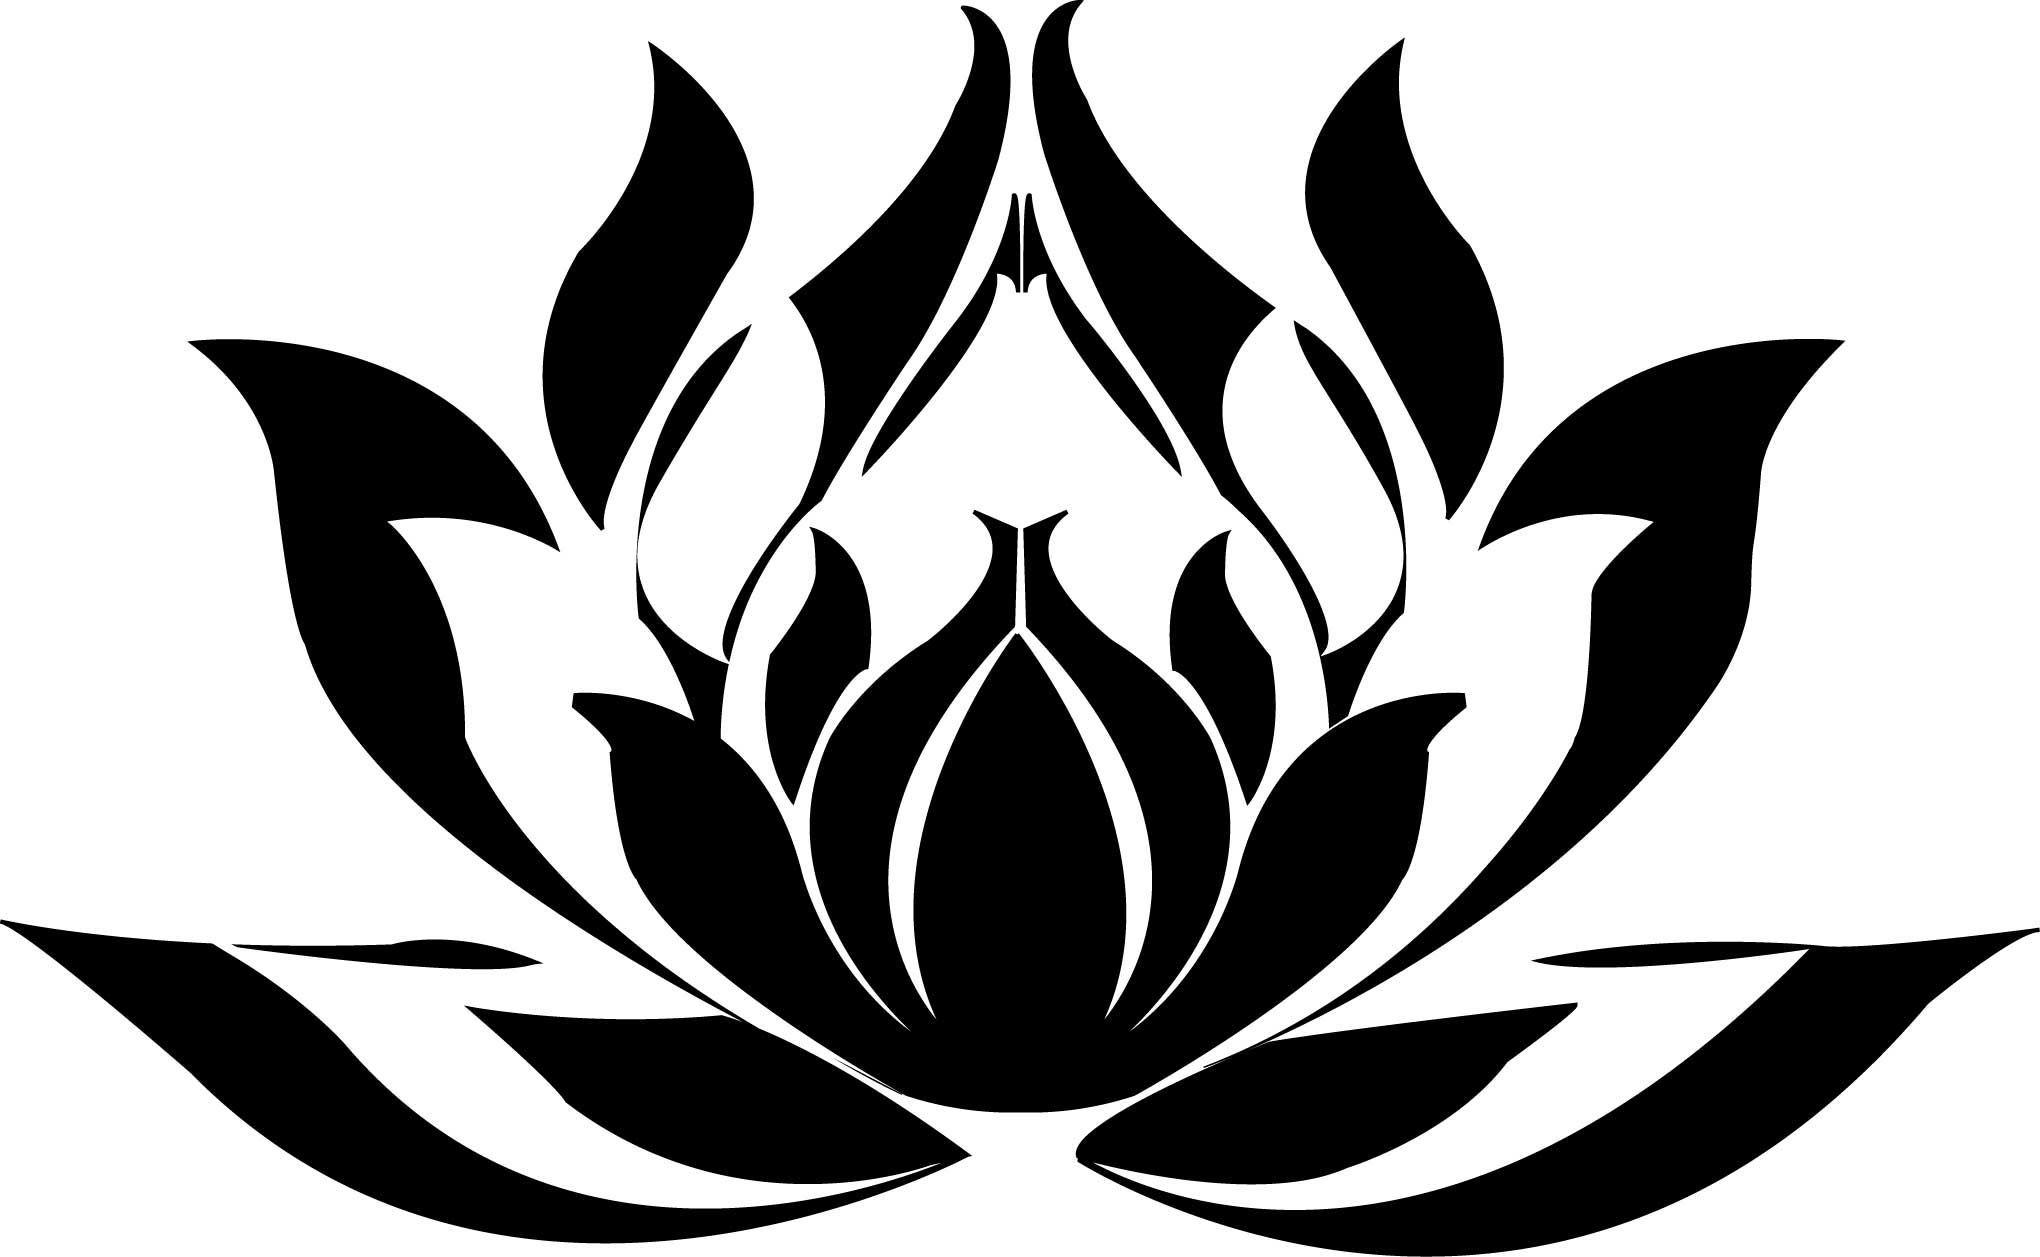 Black and White Lotus Logo - Black And White Lotus Flower Drawings | MyFlowerReviews | My ...